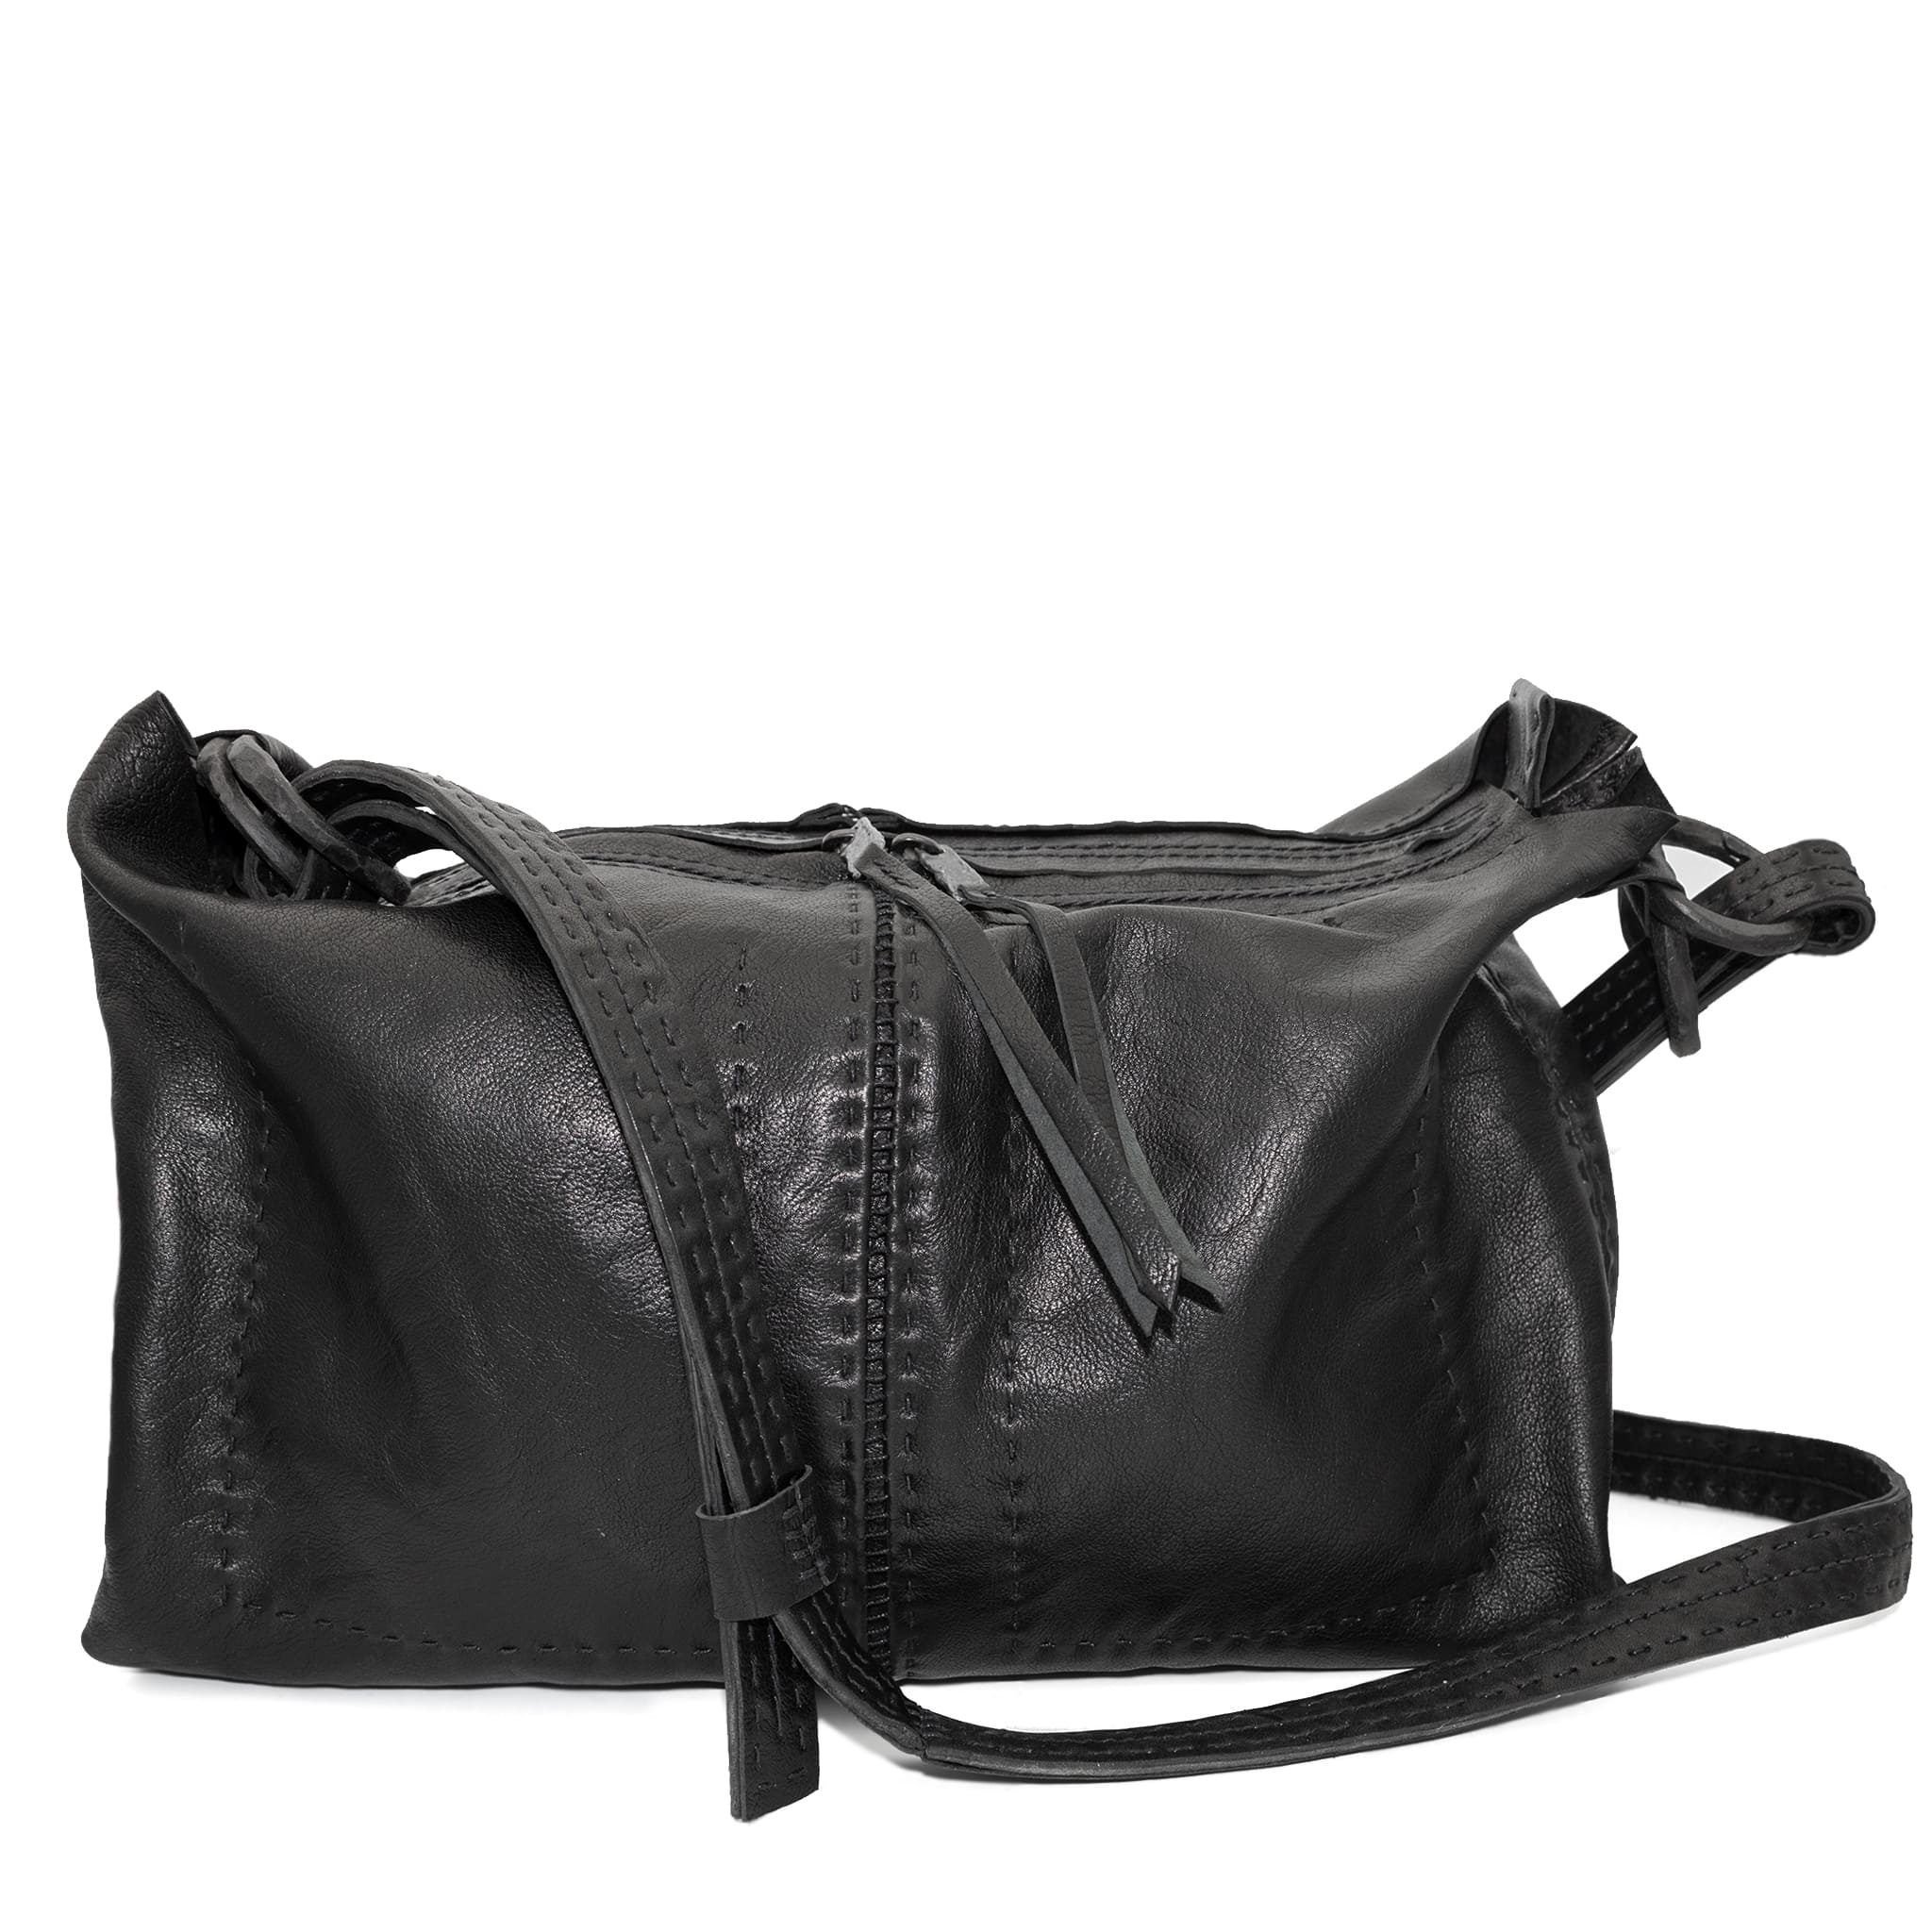 avant garde hand sewn leather bags, wallets and accessories